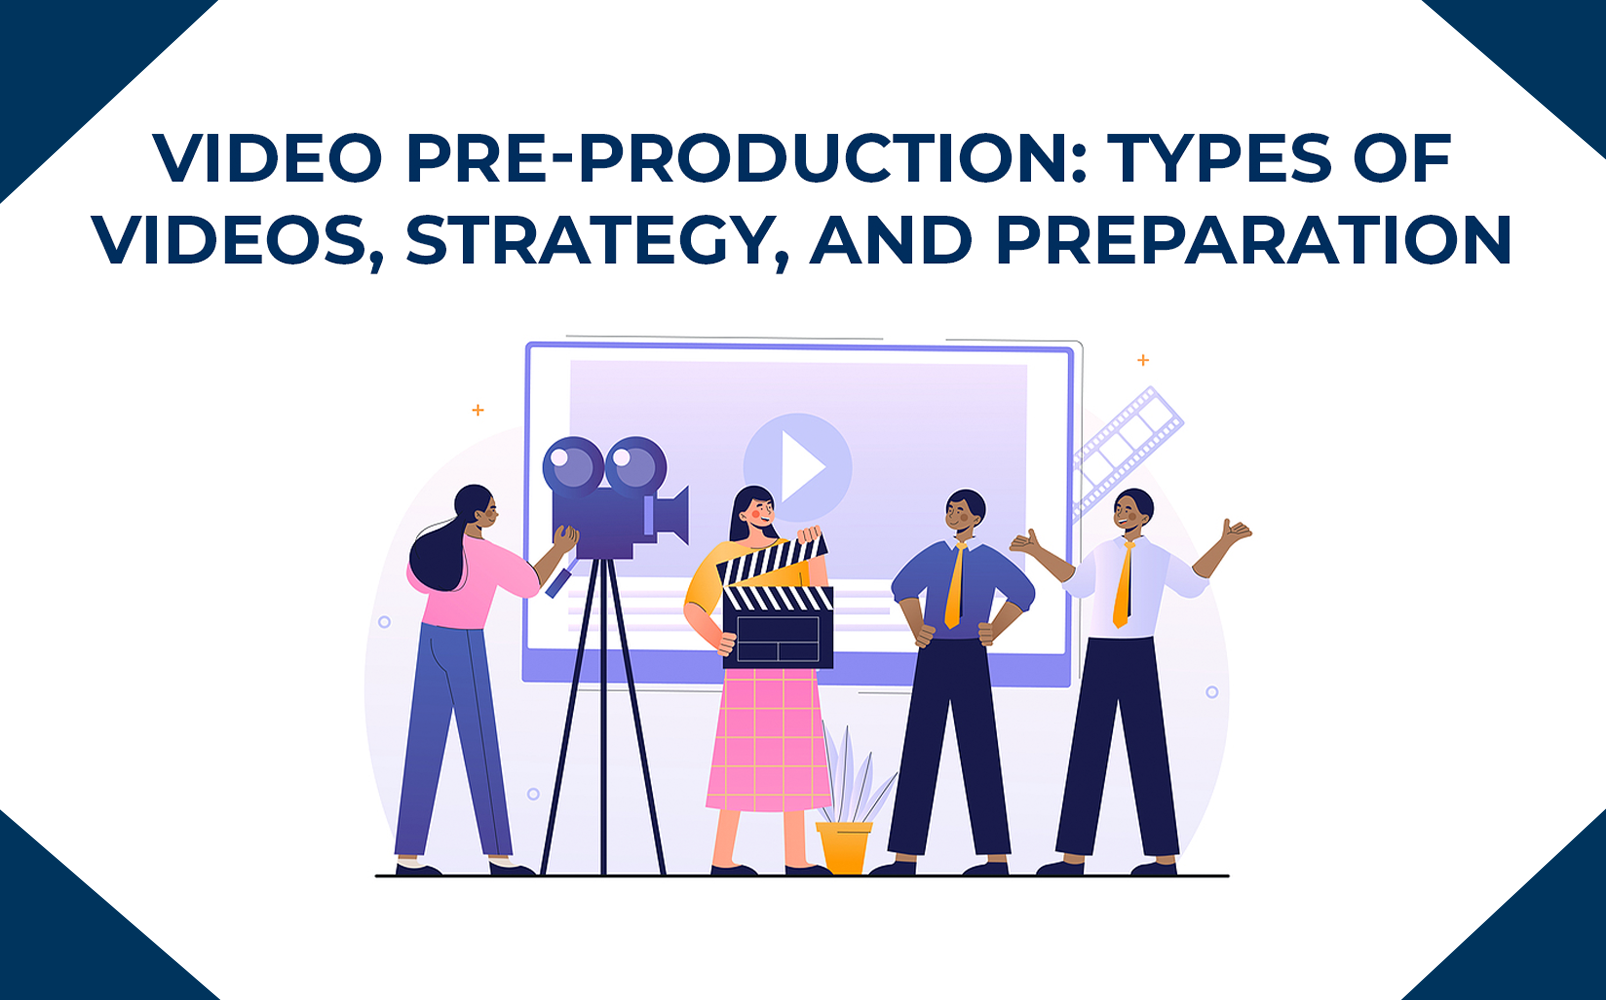 Video Pre-Production: Types of Videos, Strategy, and Preparation